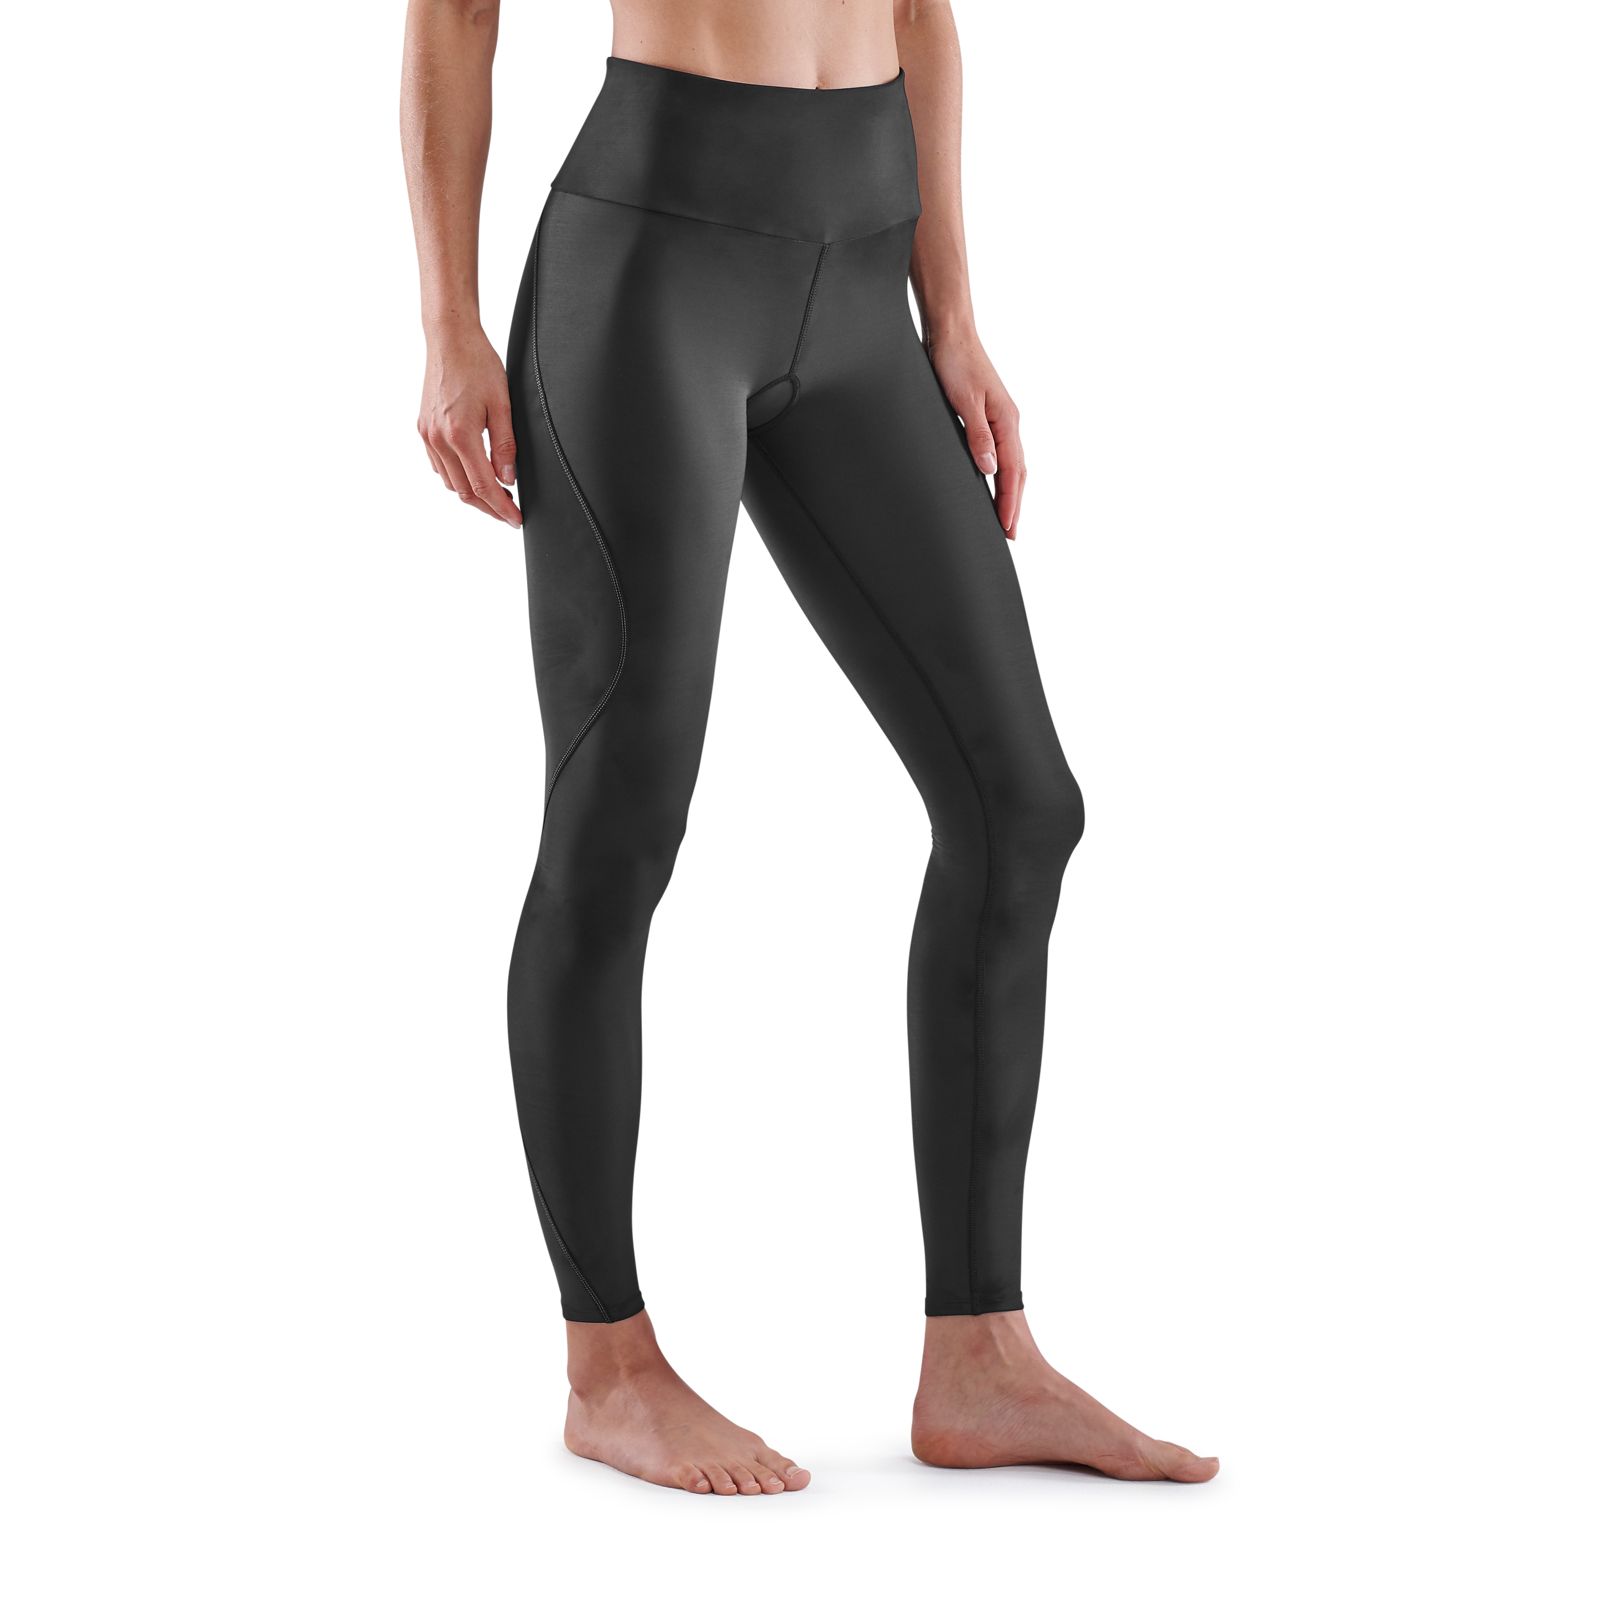 SKINS DNAmic Elite Recovery Womens Long Tights Black - SKINS